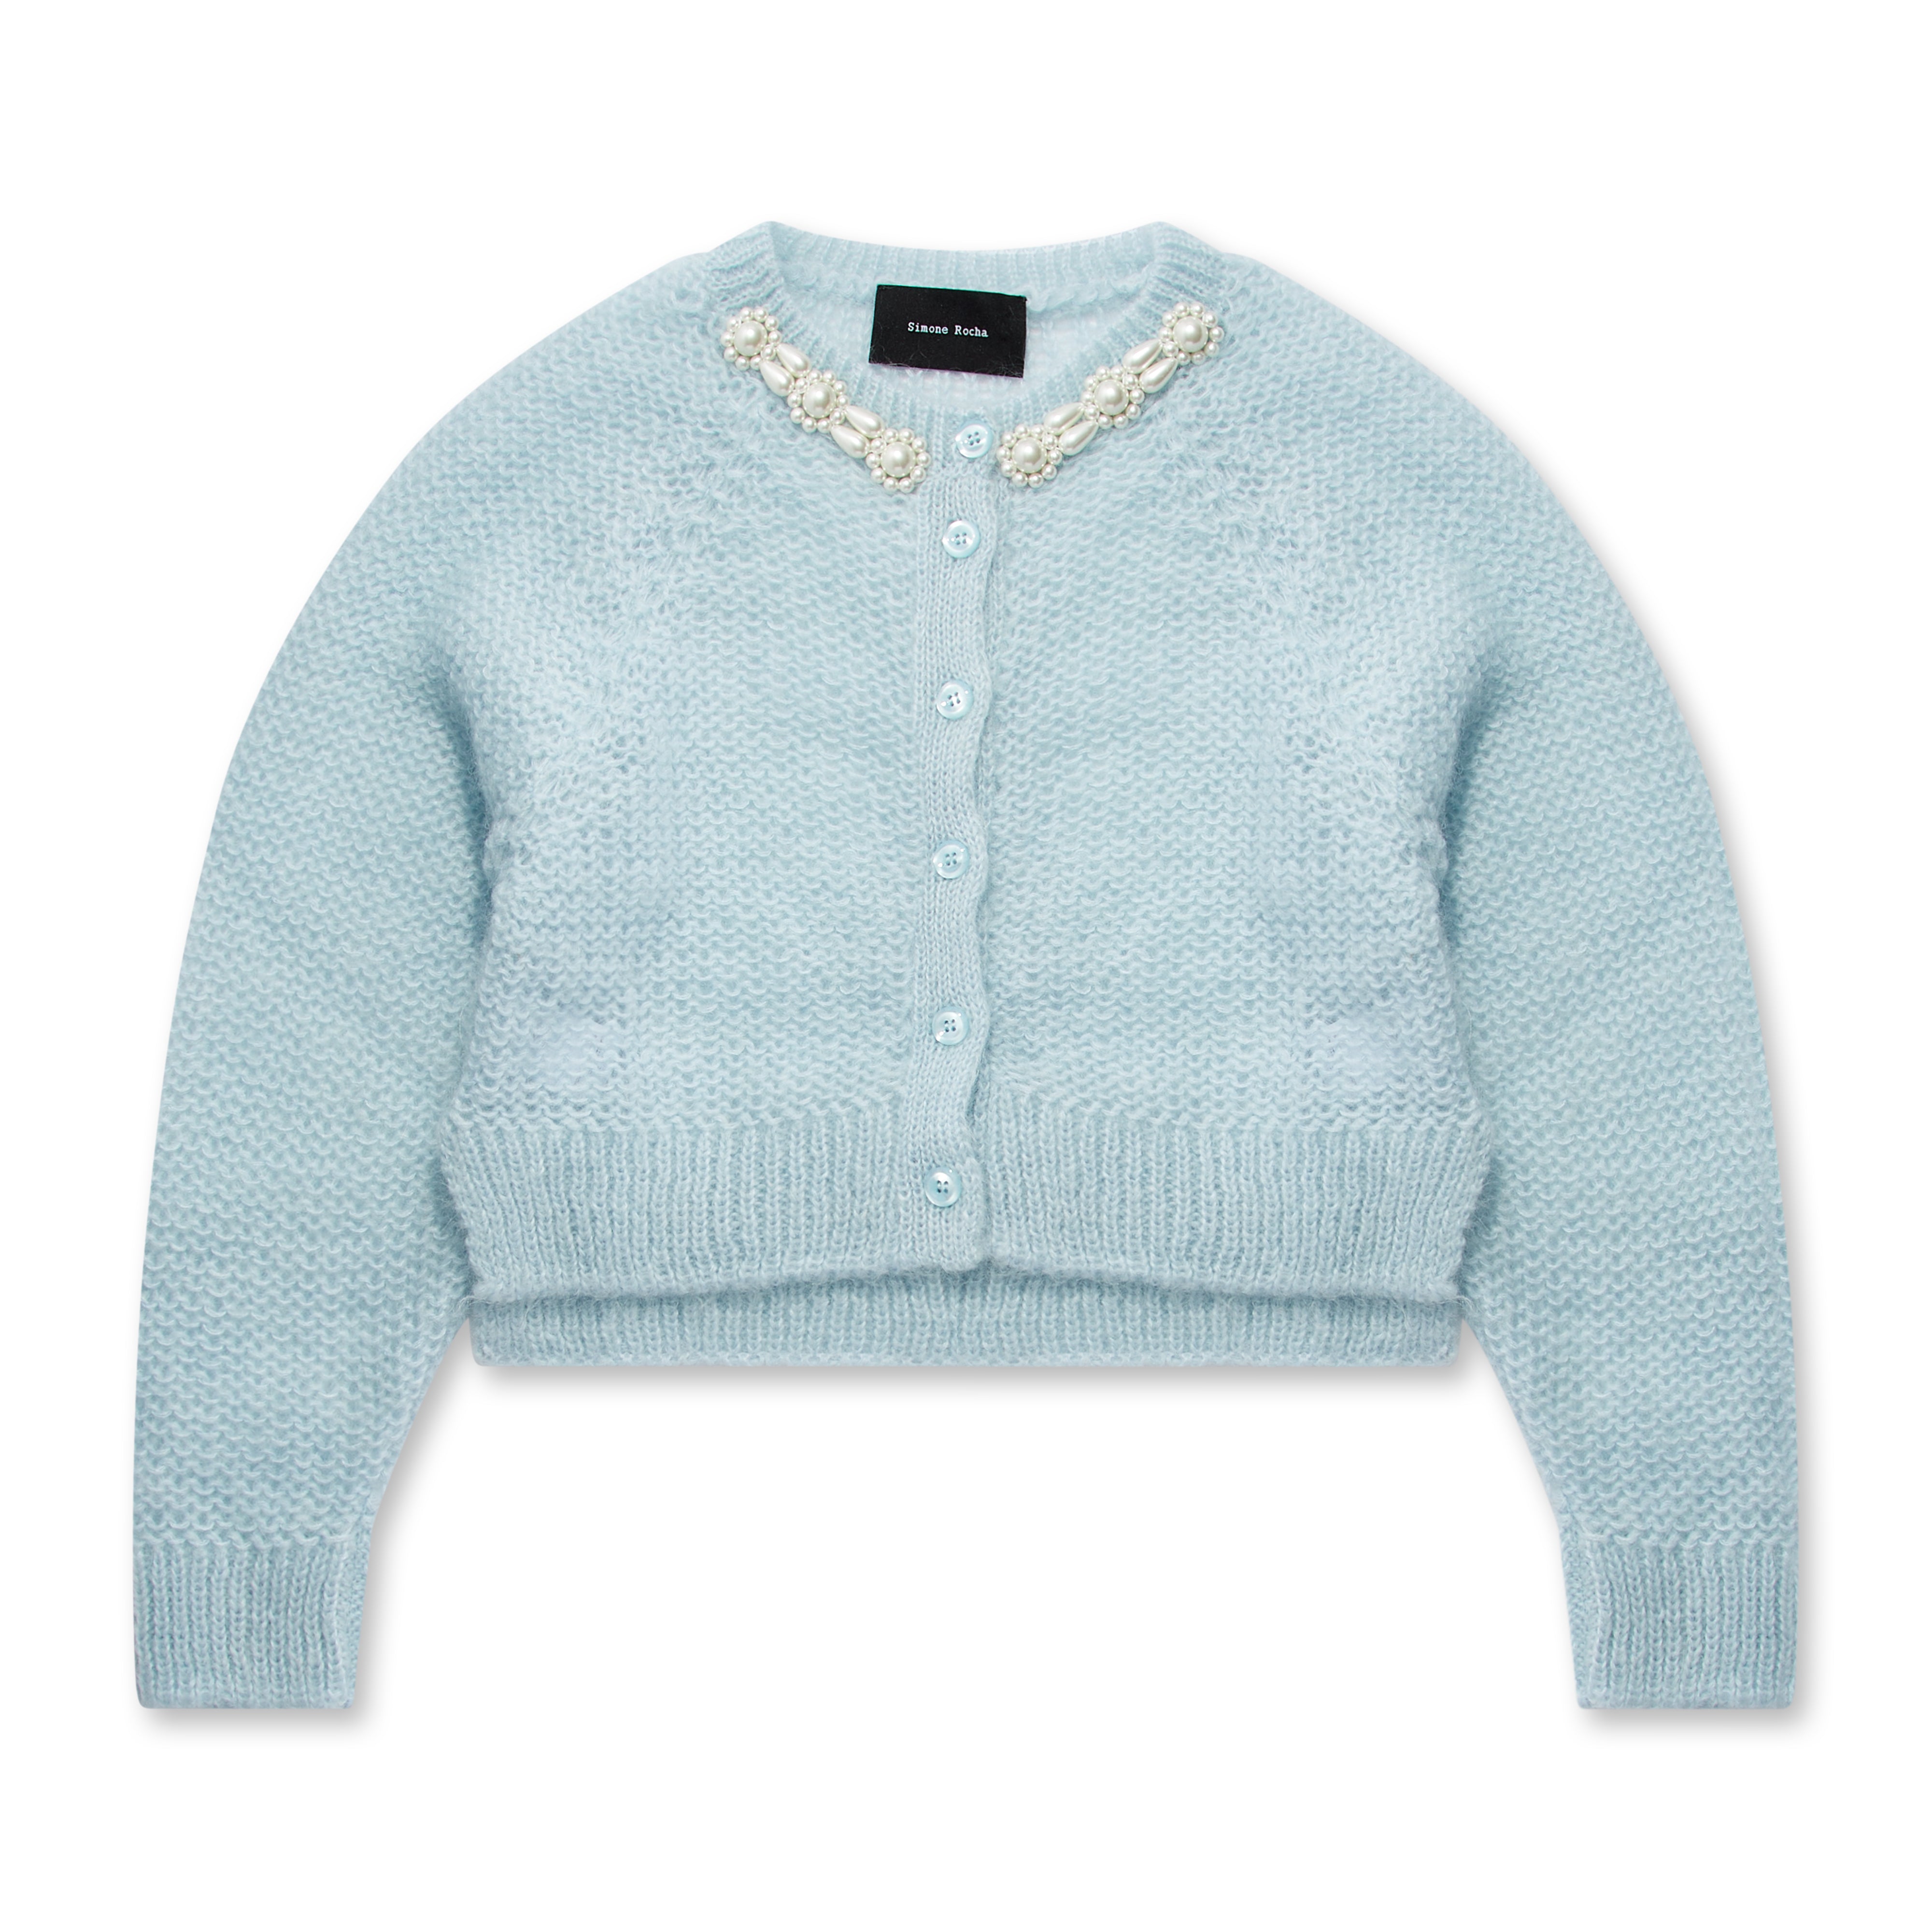 Simone Rocha - Women’s Fitted Cropped Cardigan - (Baby Blue)